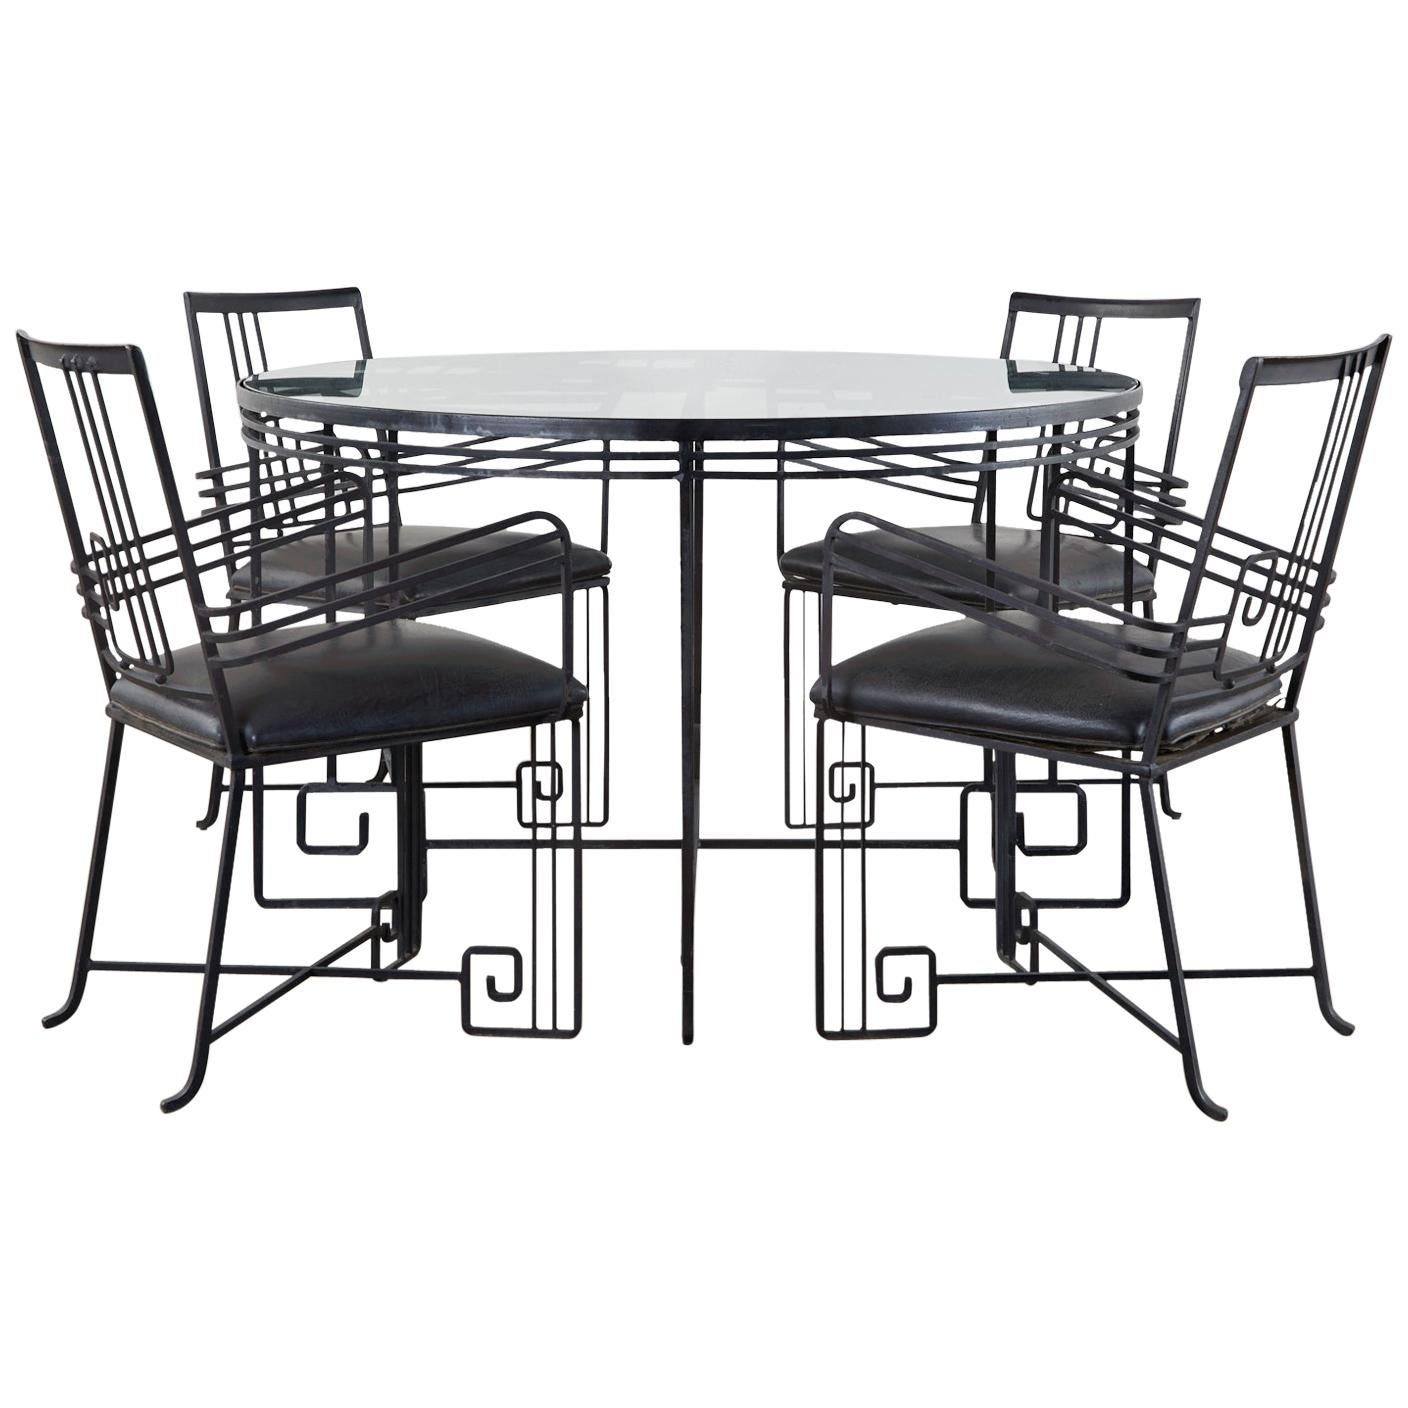 Salterini Style Art Deco Garden Dining Table and Chairs